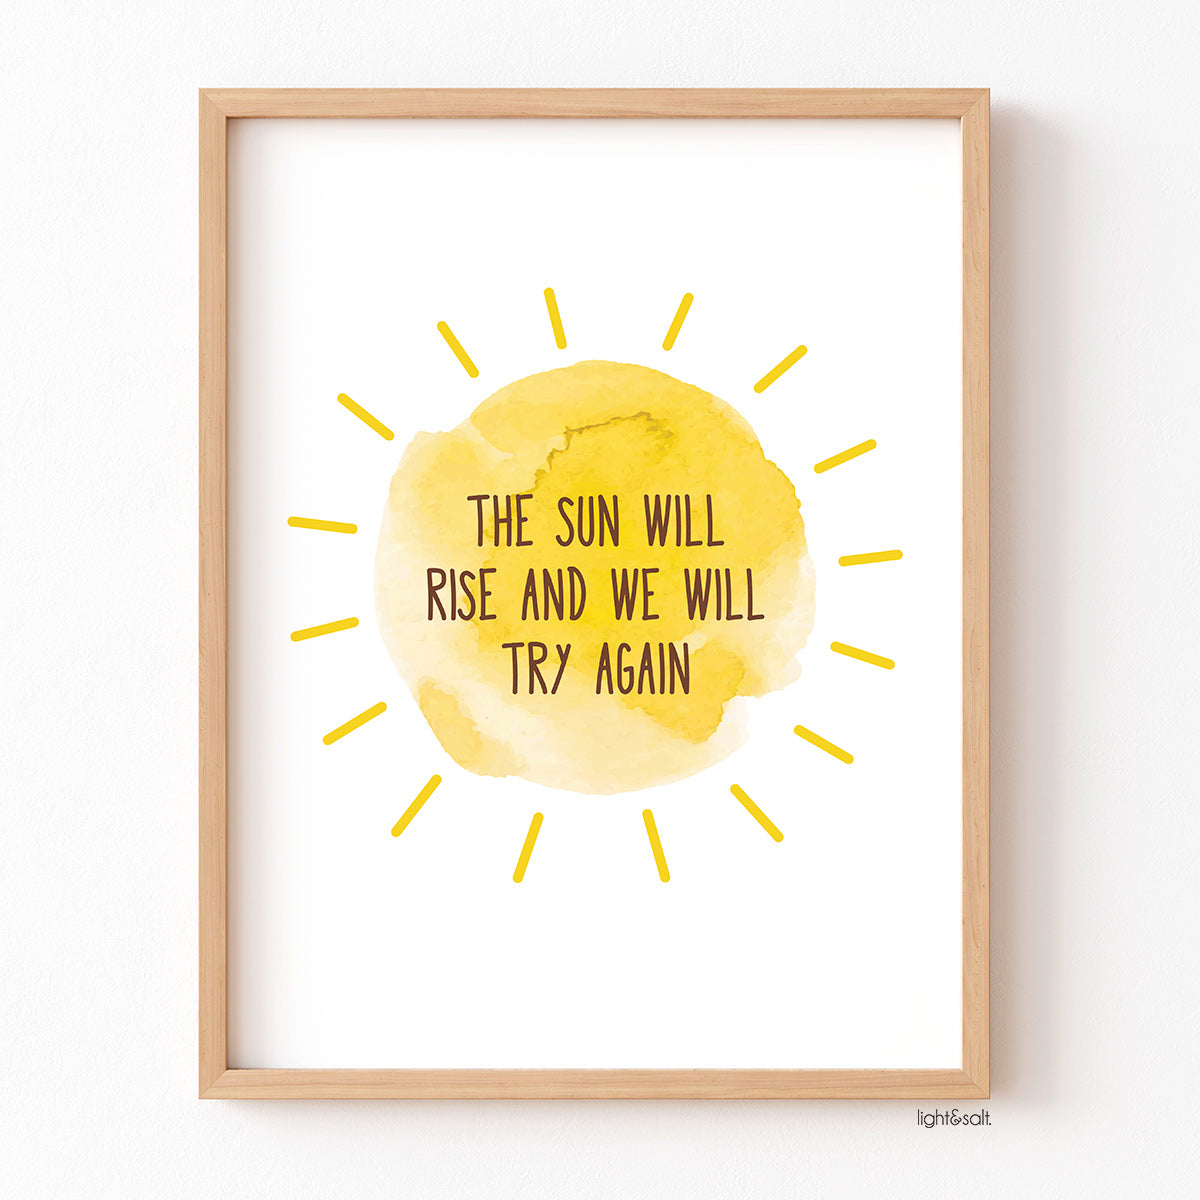 The sun will rise and we will try again poster